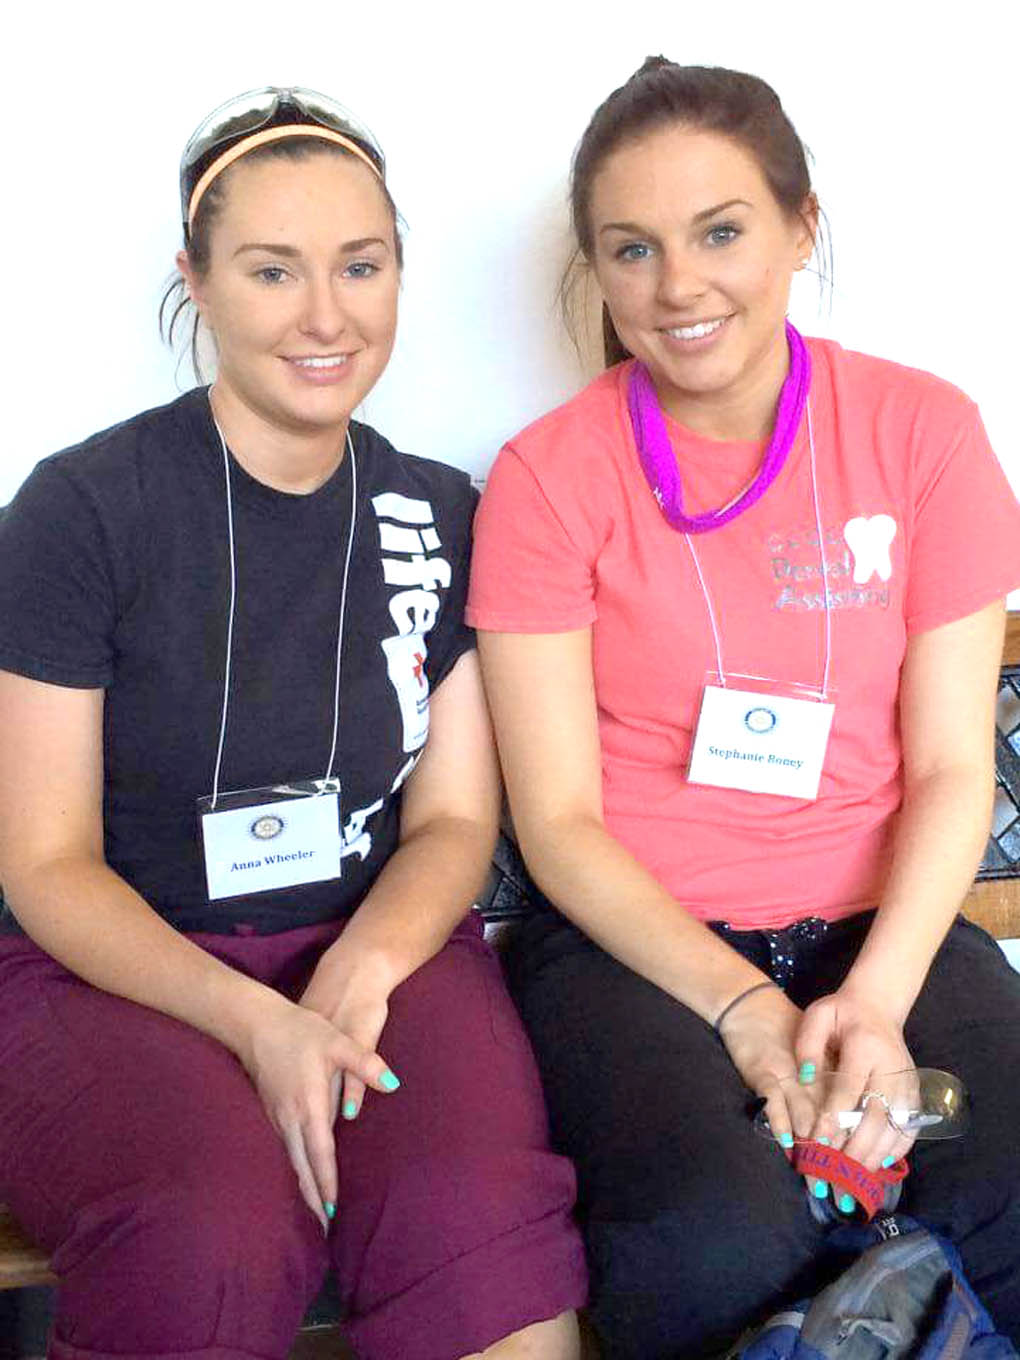 Click to enlarge,  Anna Wheeler and Stephanie Boney, graduates of the Central Carolina Community College Dental Assisting program, recently traveled to Costa Rica to help provide free dental care to impoverished children. 